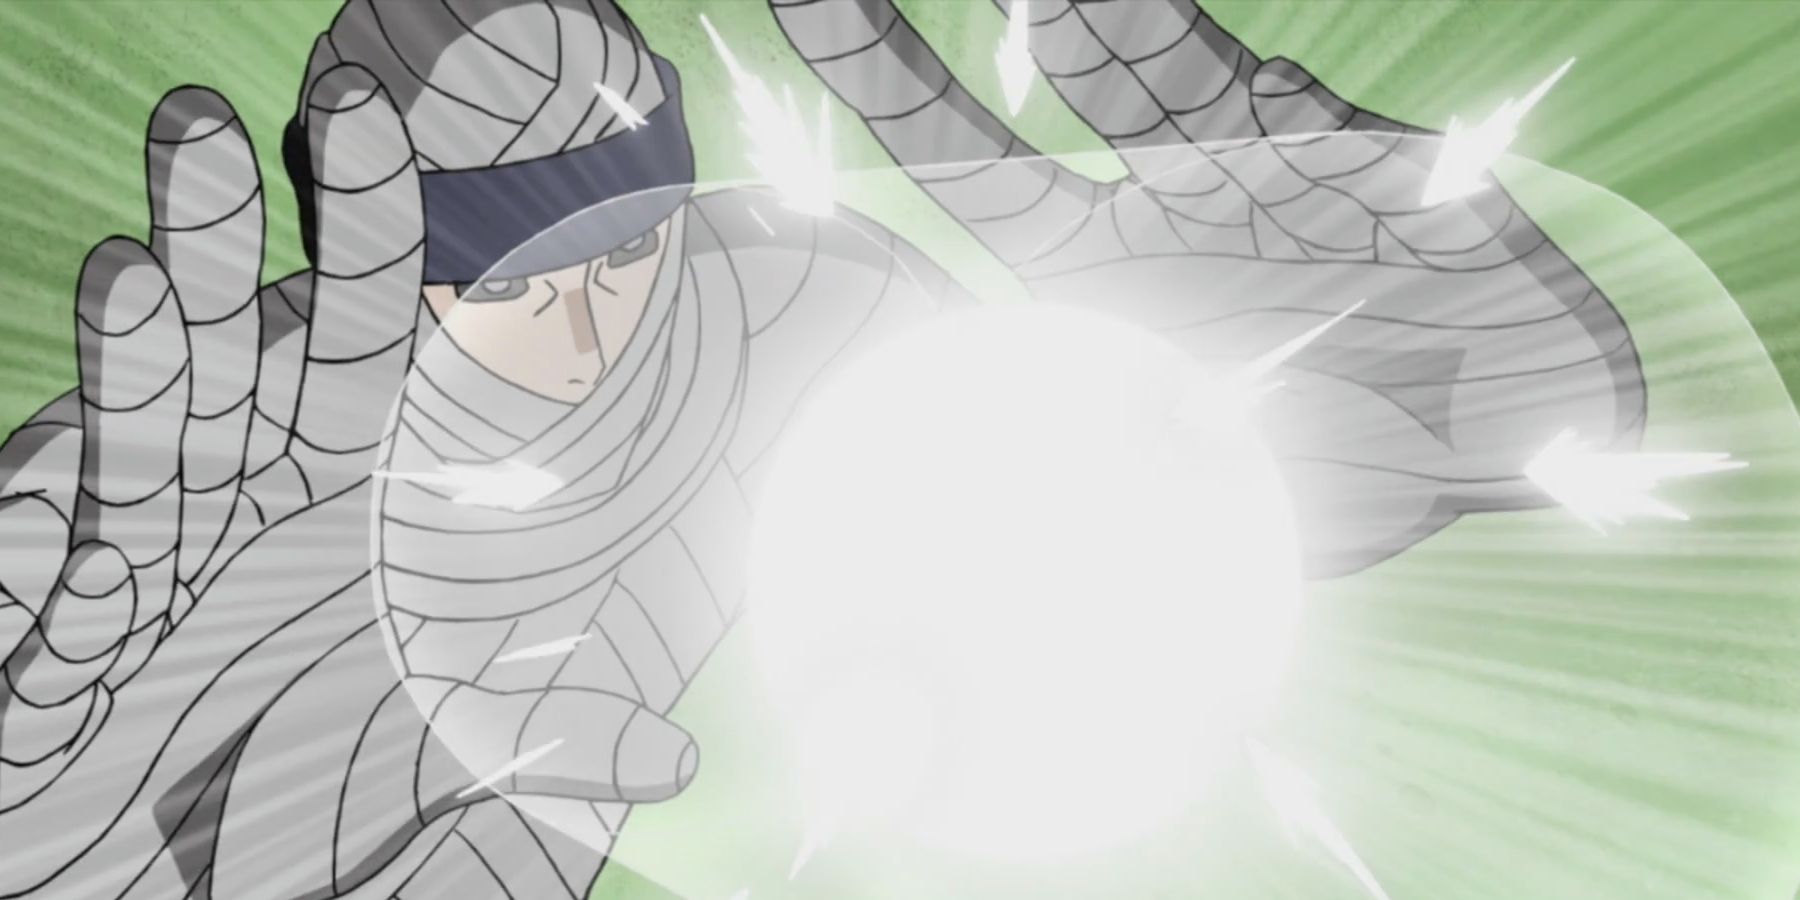 Mu from Naruto using Dust Release